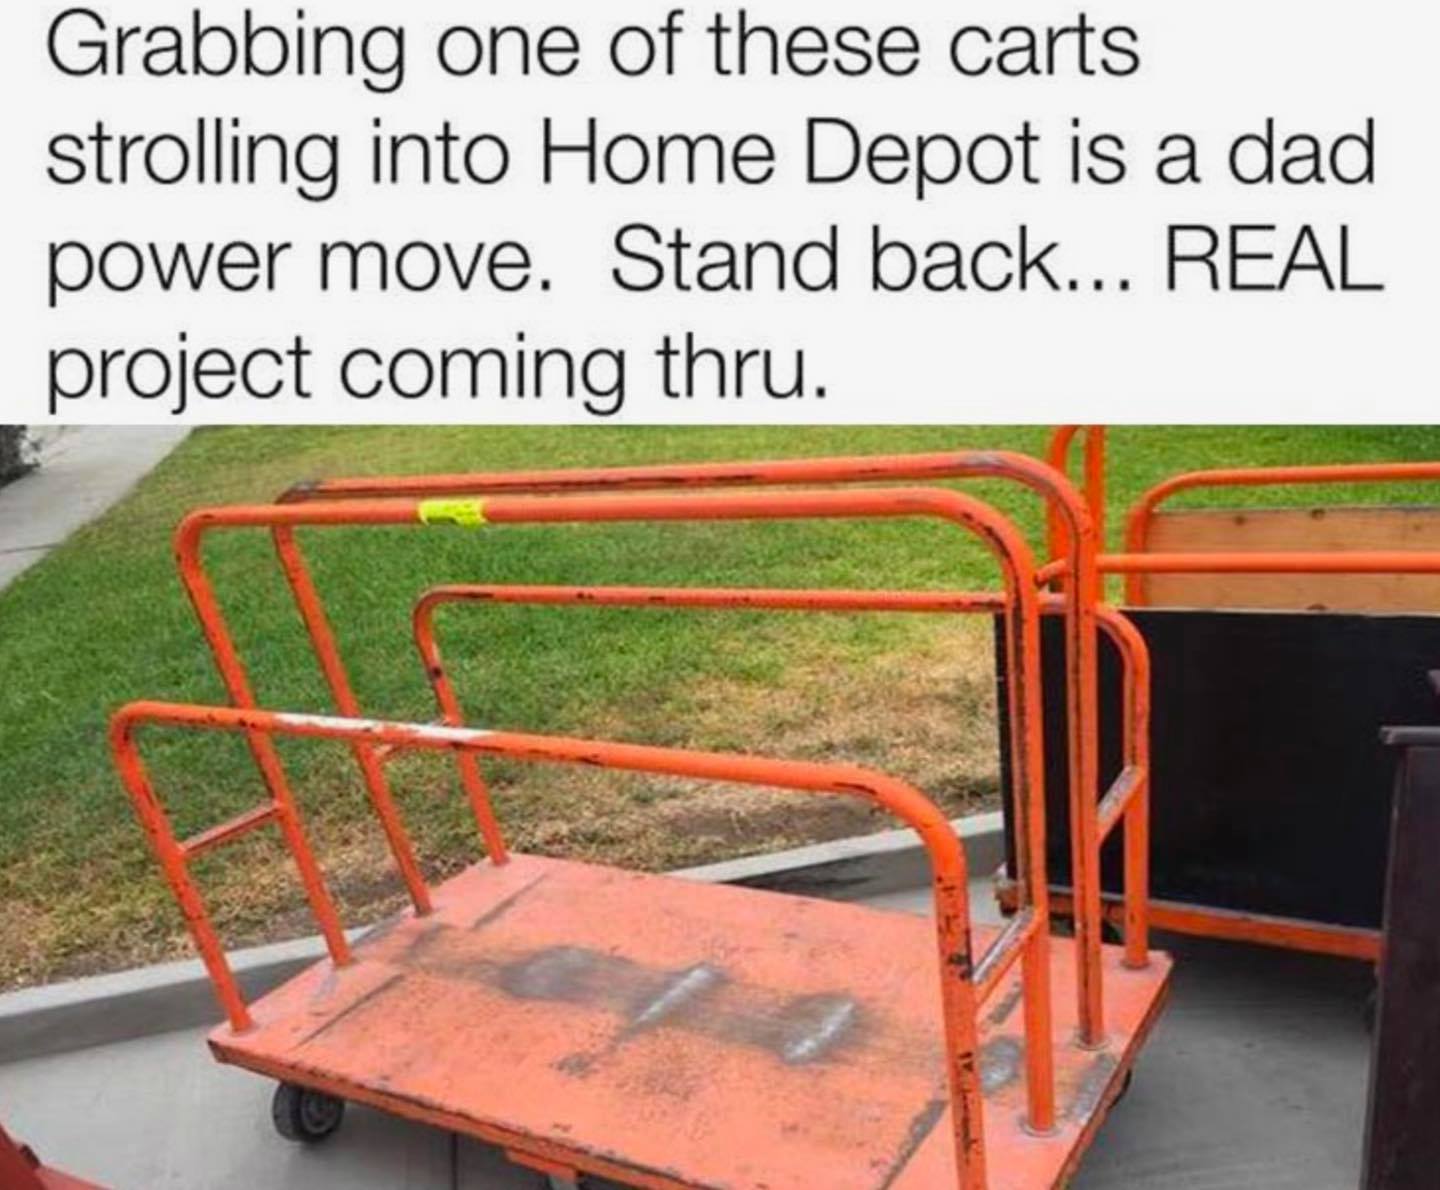 vehicle - Grabbing one of these carts strolling into Home Depot is a dad power move. Stand back... Real project coming thru.